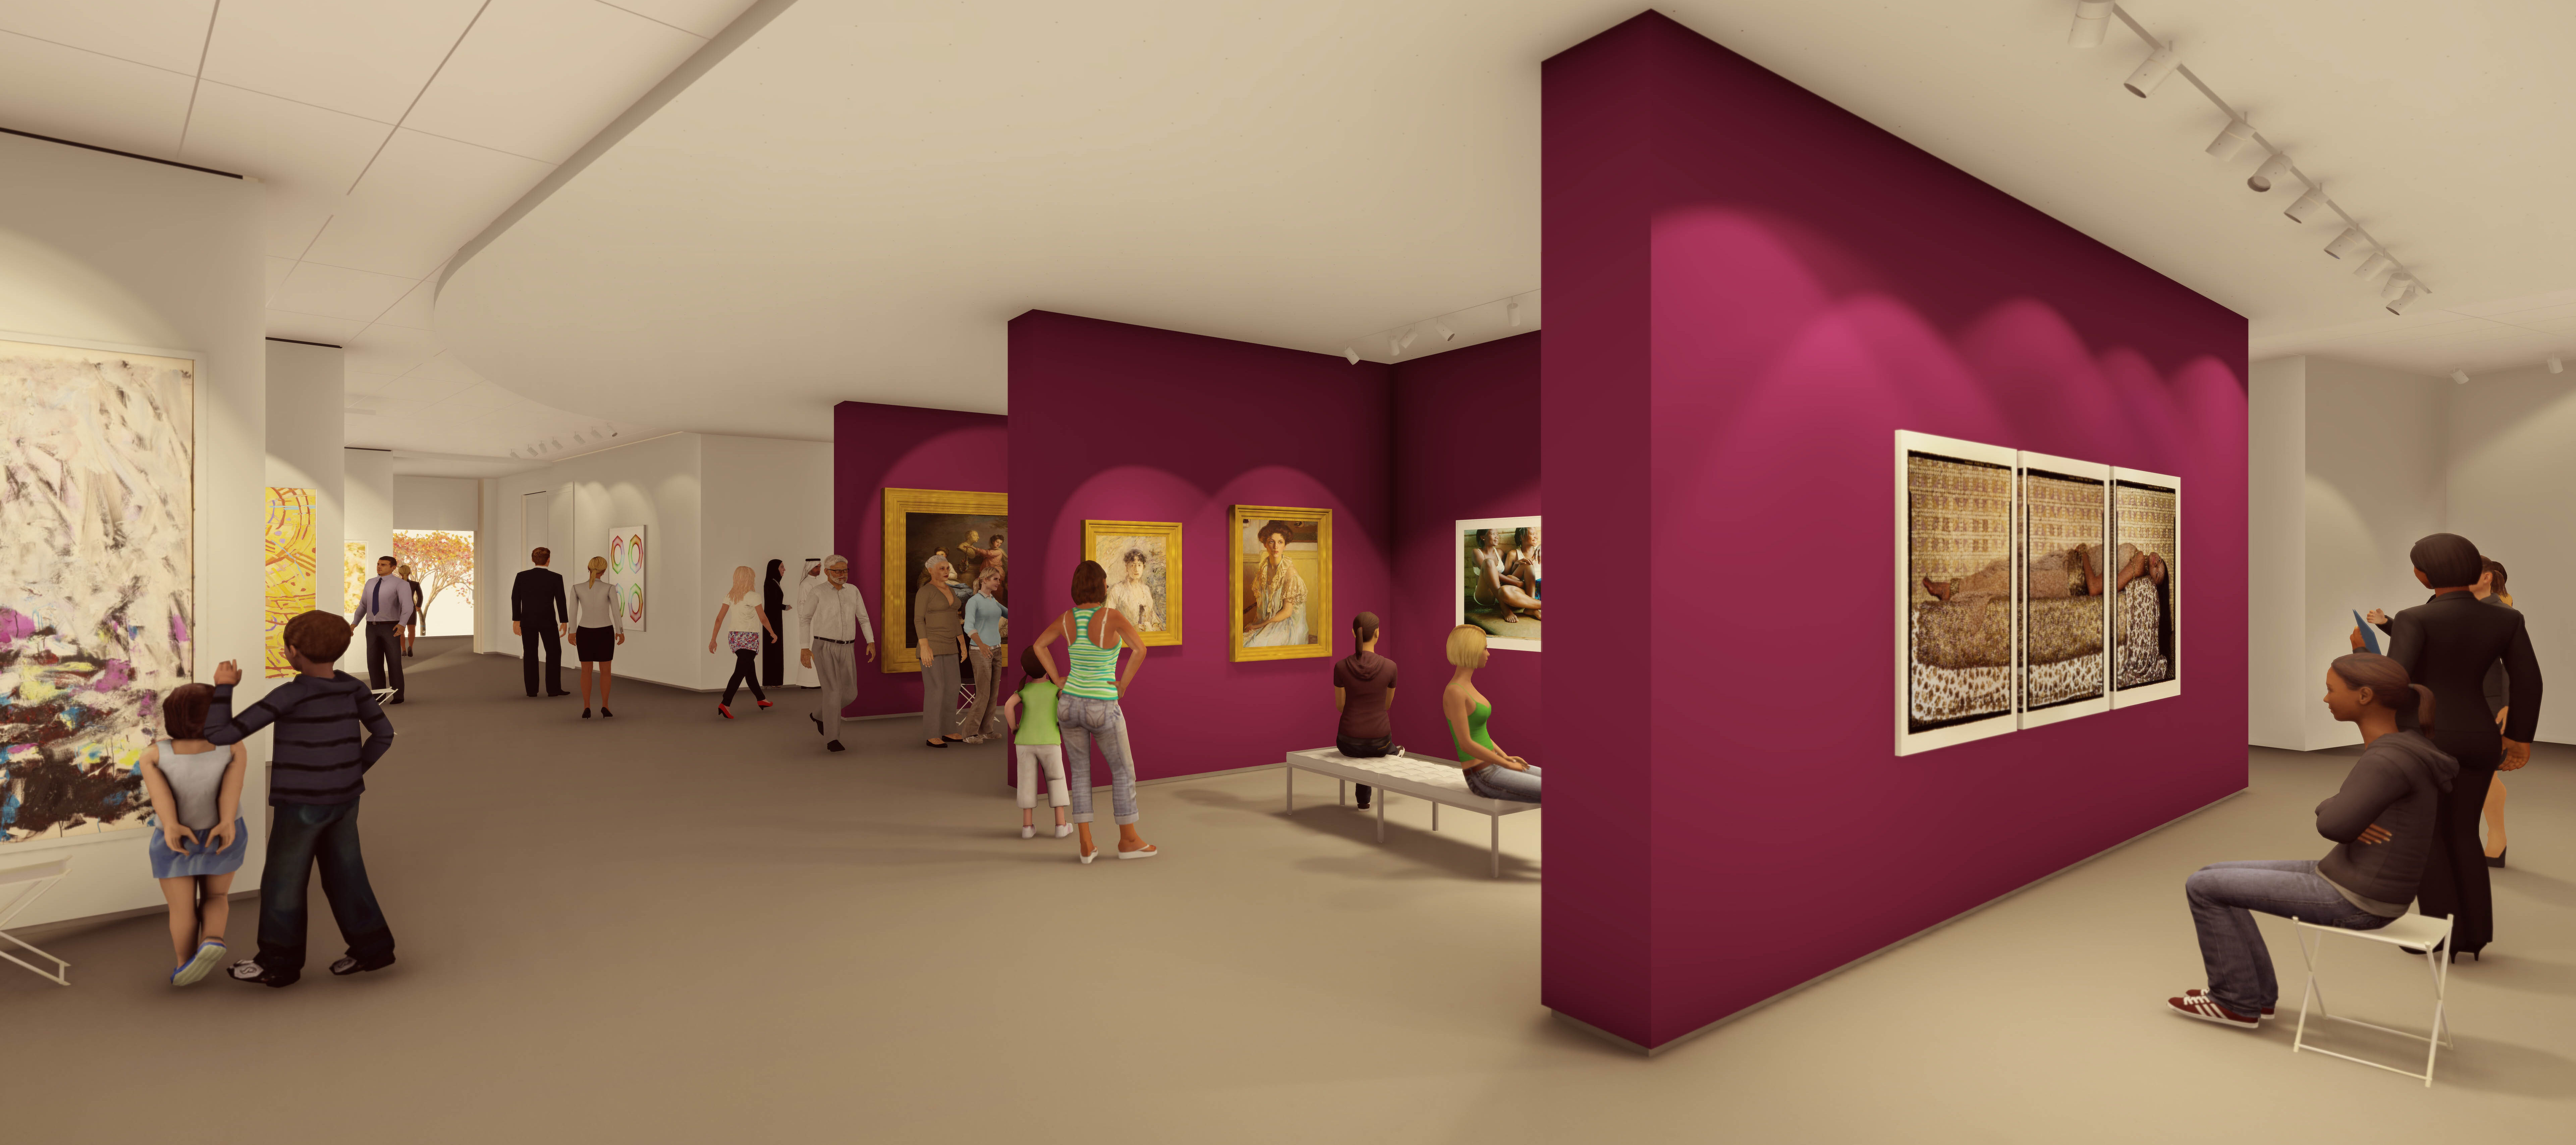 Architectural rendering of the gallery with people looking at art hung on white and magenta walls.